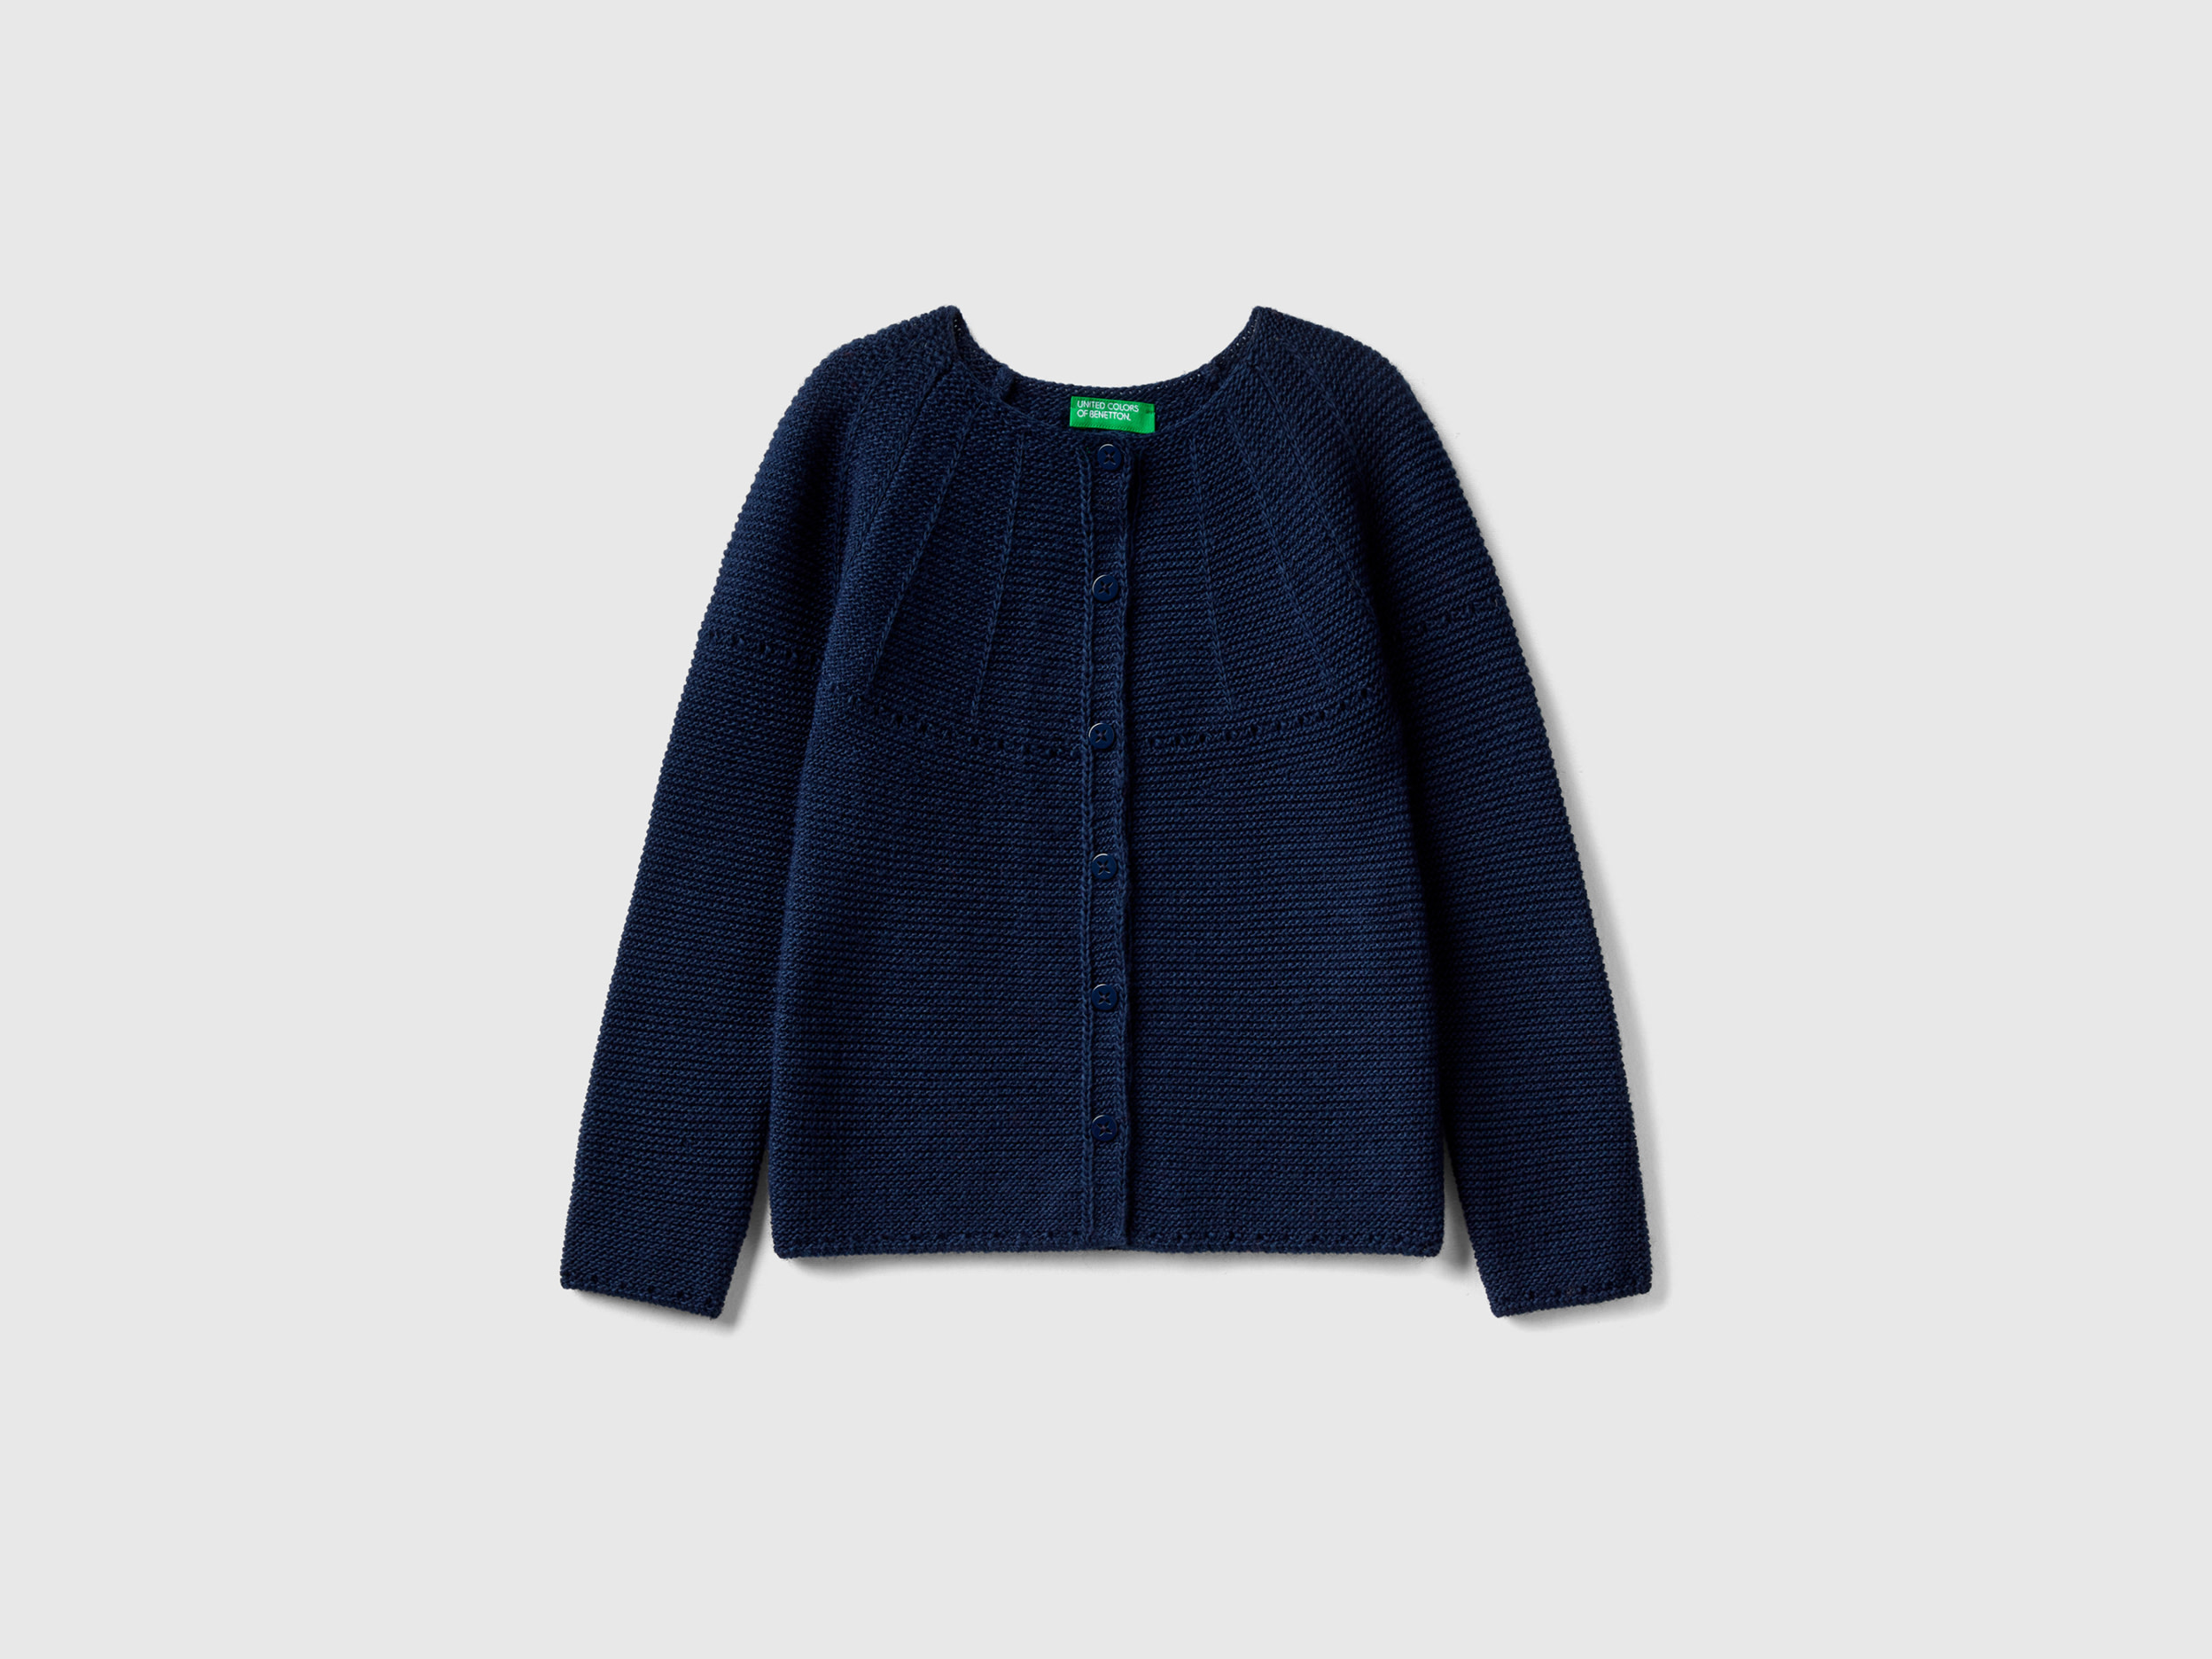 Benetton, Cardigan With Perforated Details, size 18-24, Dark Blue, Kids